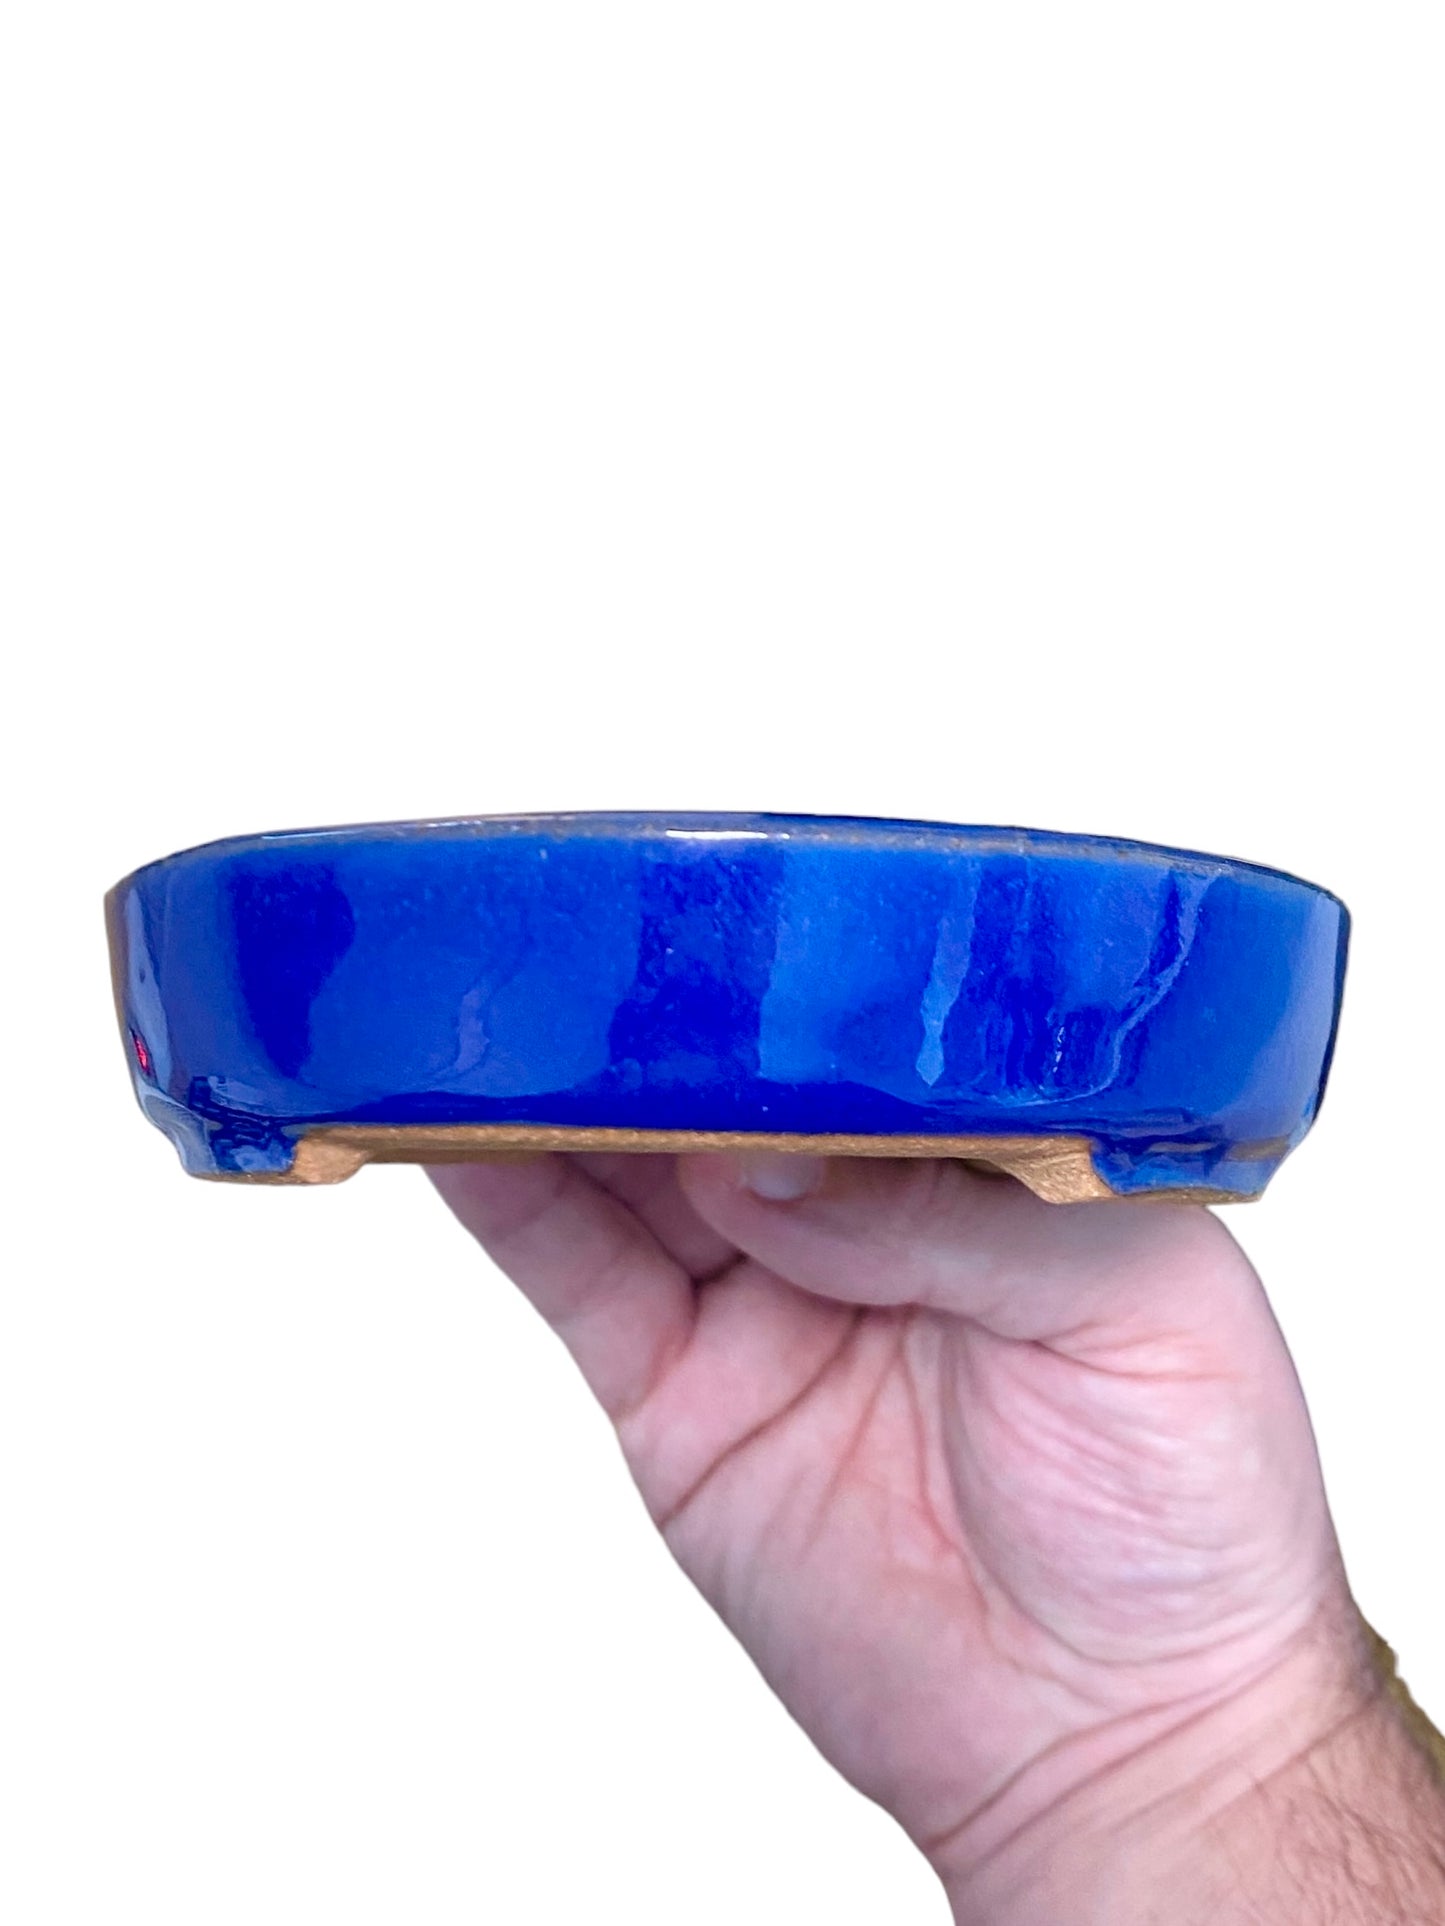 Ikko - Royal Blue Glazed Oval Bonsai or Accent Pot (6-7/8” wide)